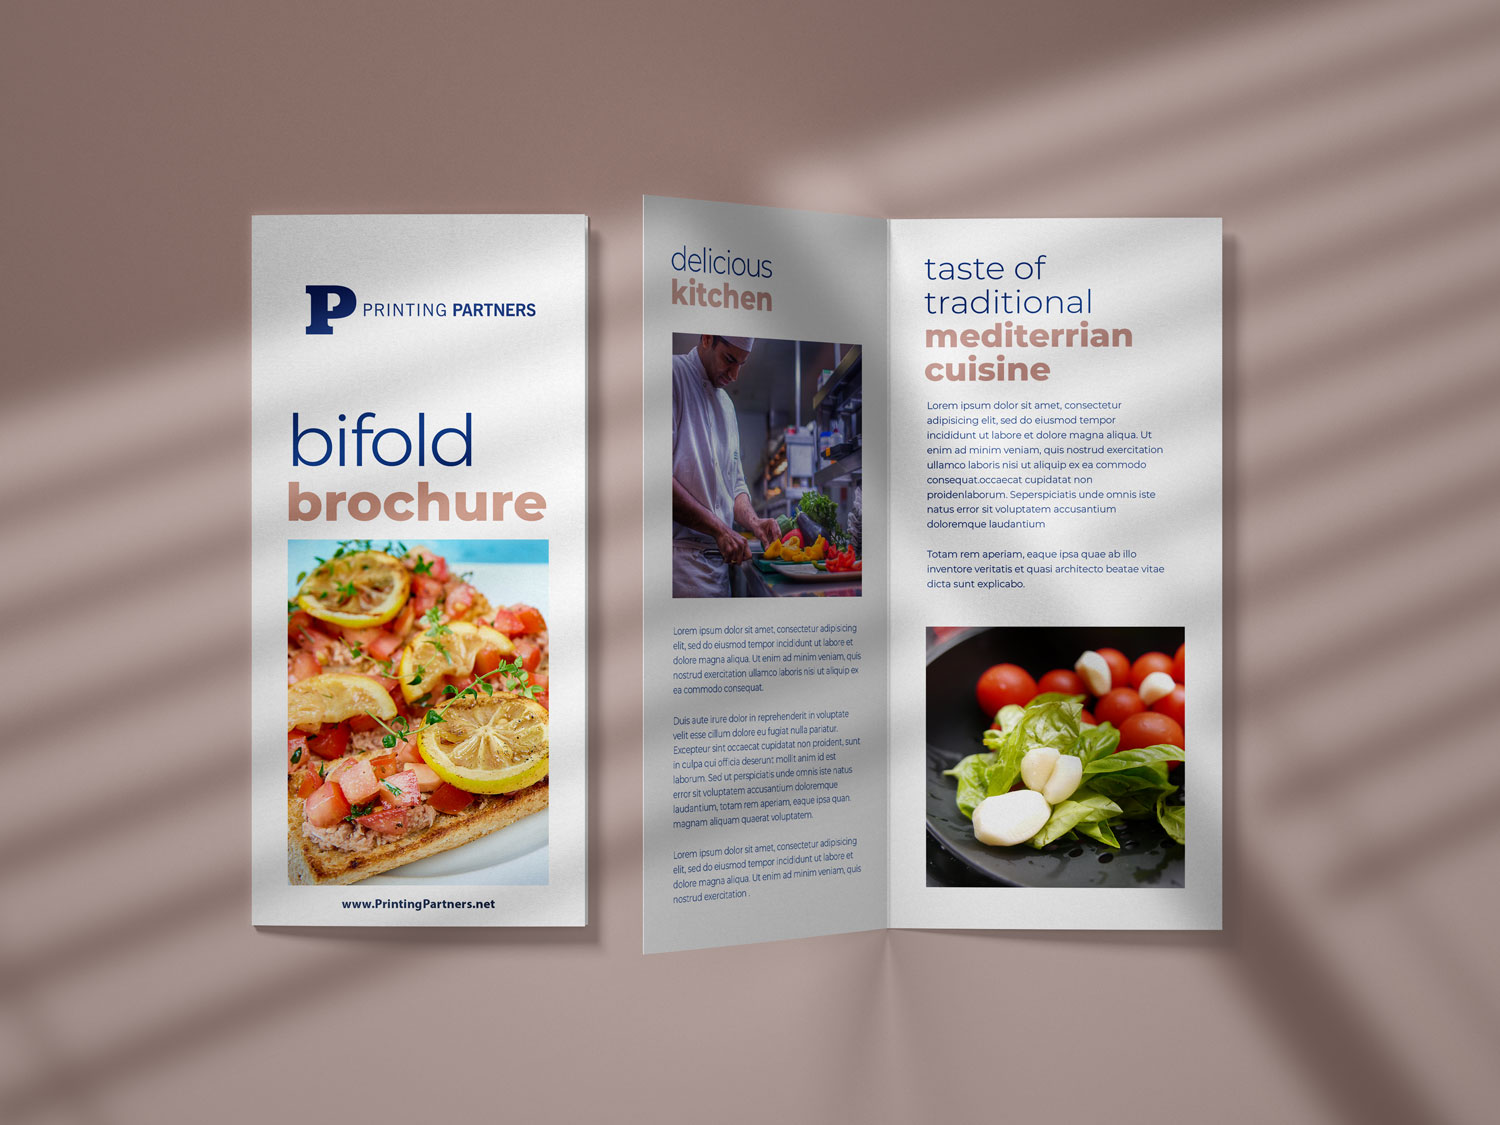 Bifold Brochure Example from Indianapolis' Printing Partners